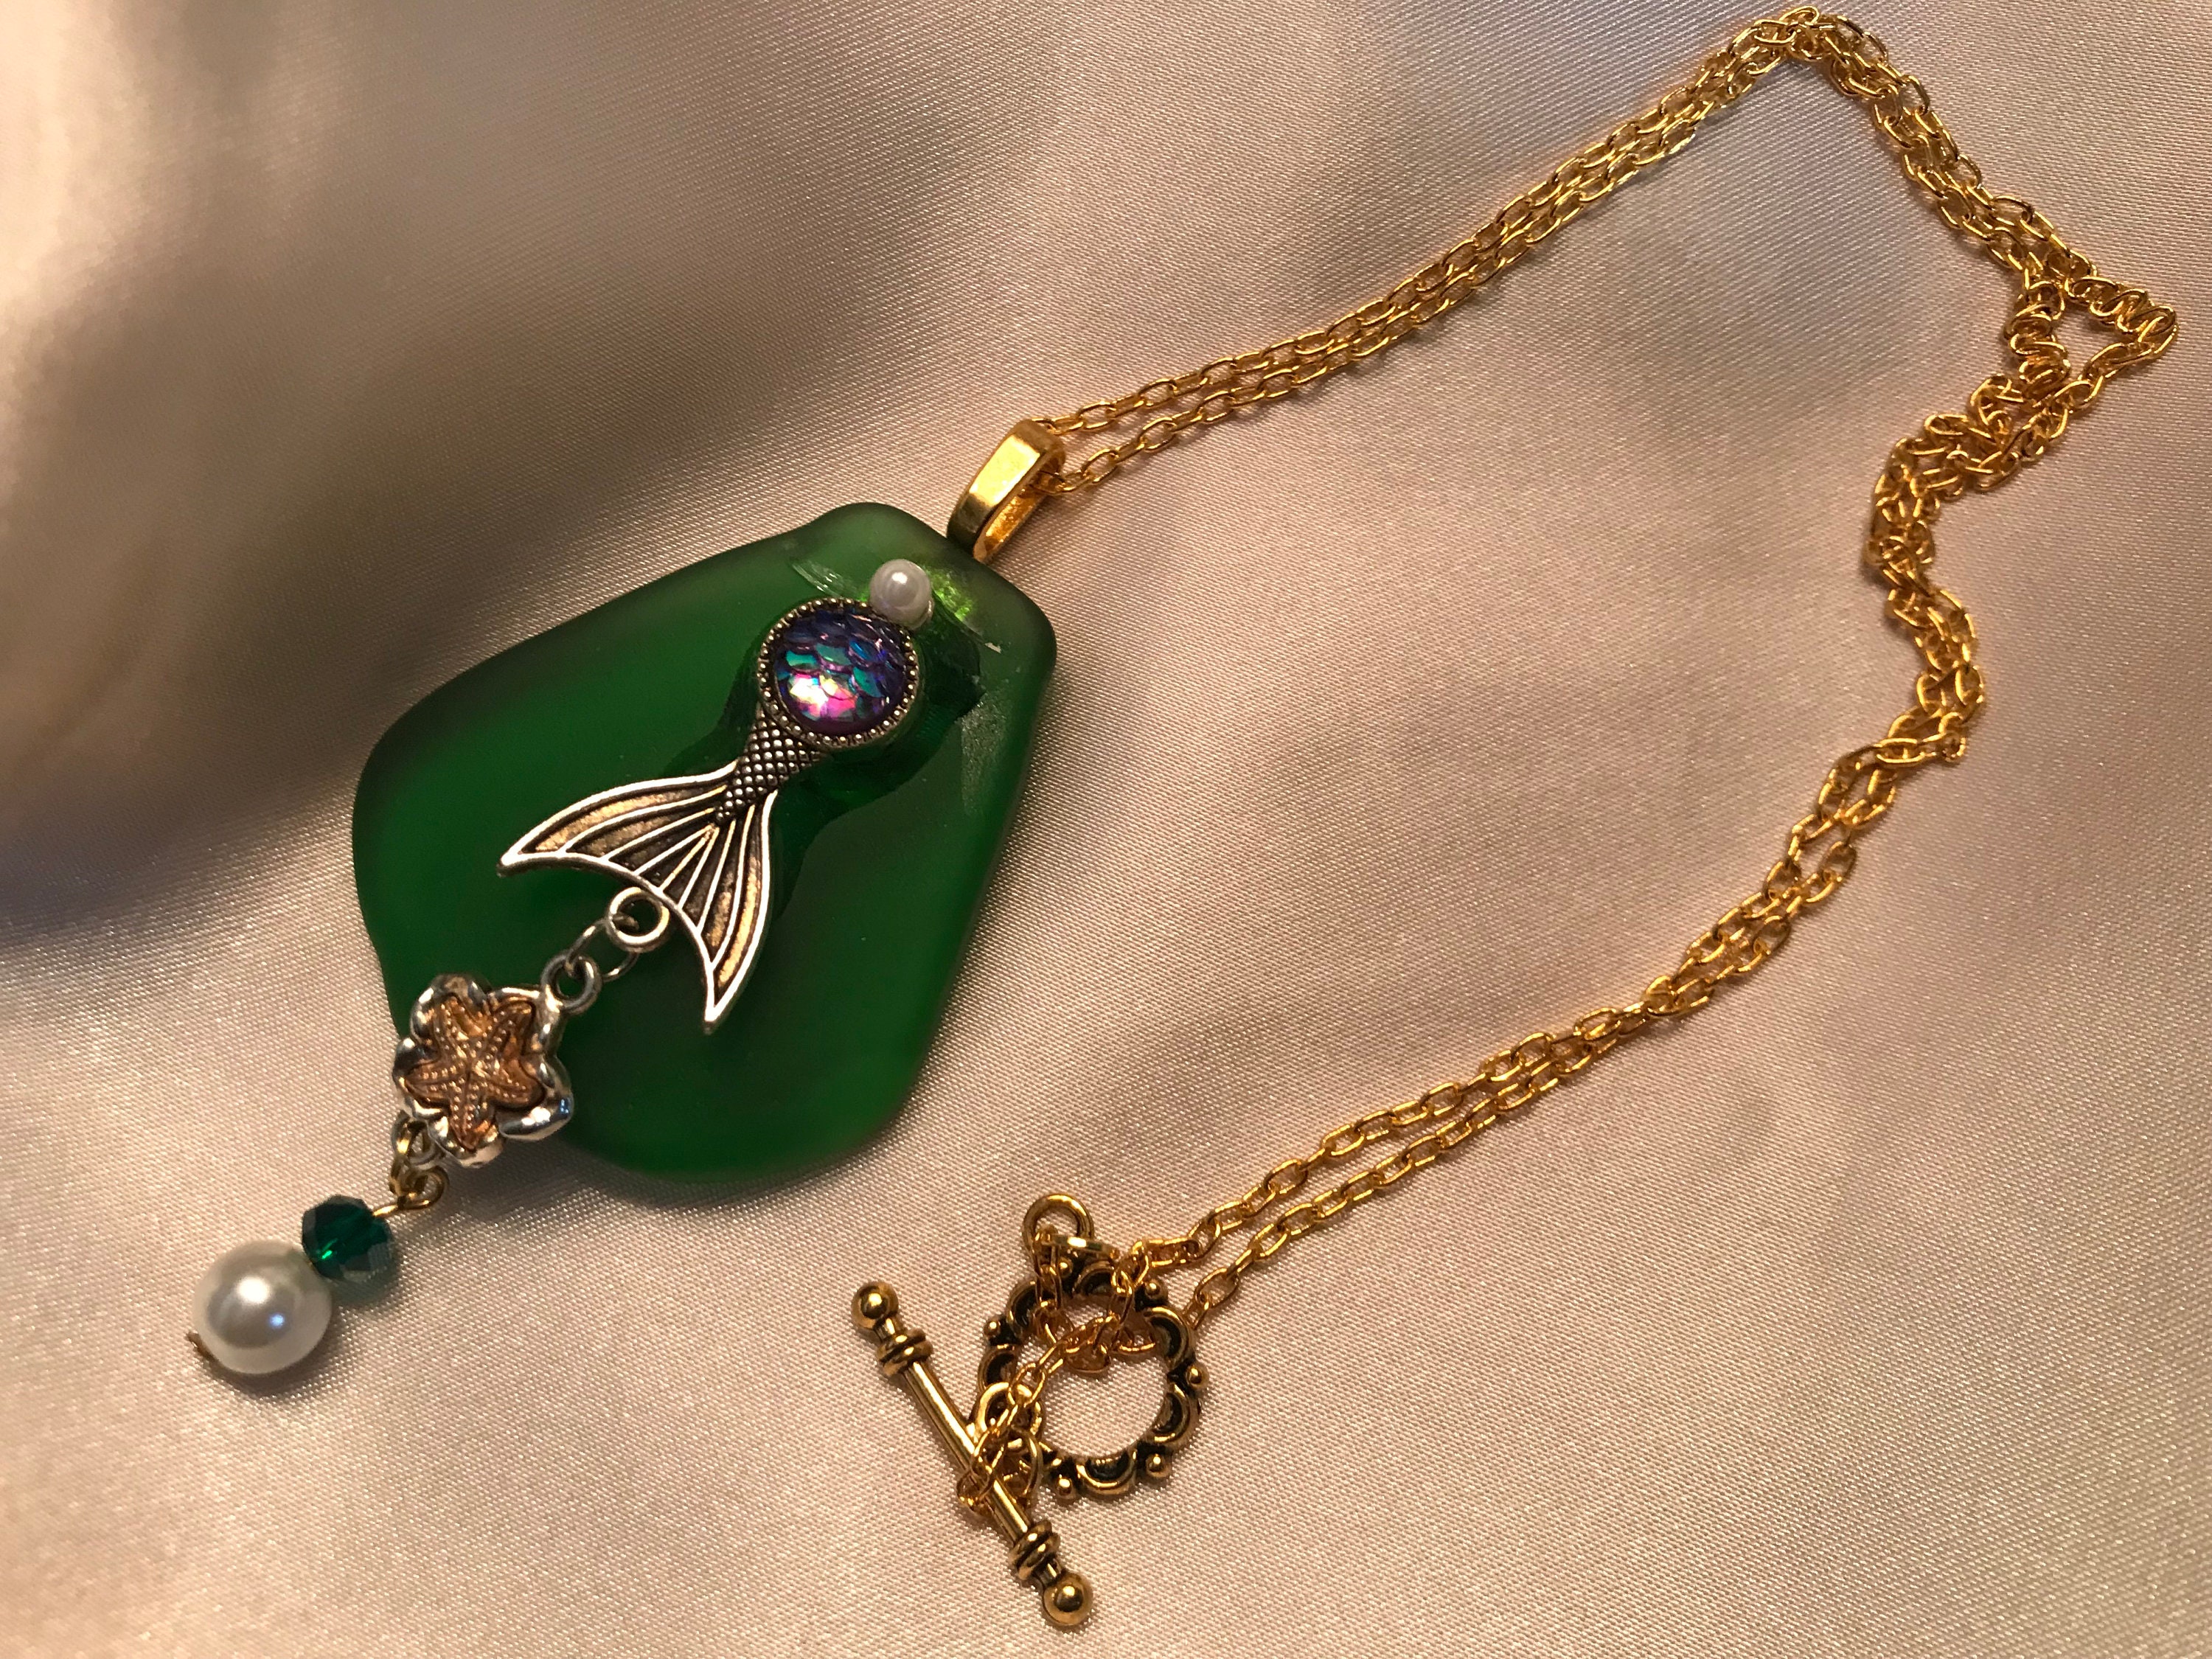 EMERALD SEA GLASS PENDANT NECKLACE WITH CHARMS AND GOLD TONE CABLE CHAIN